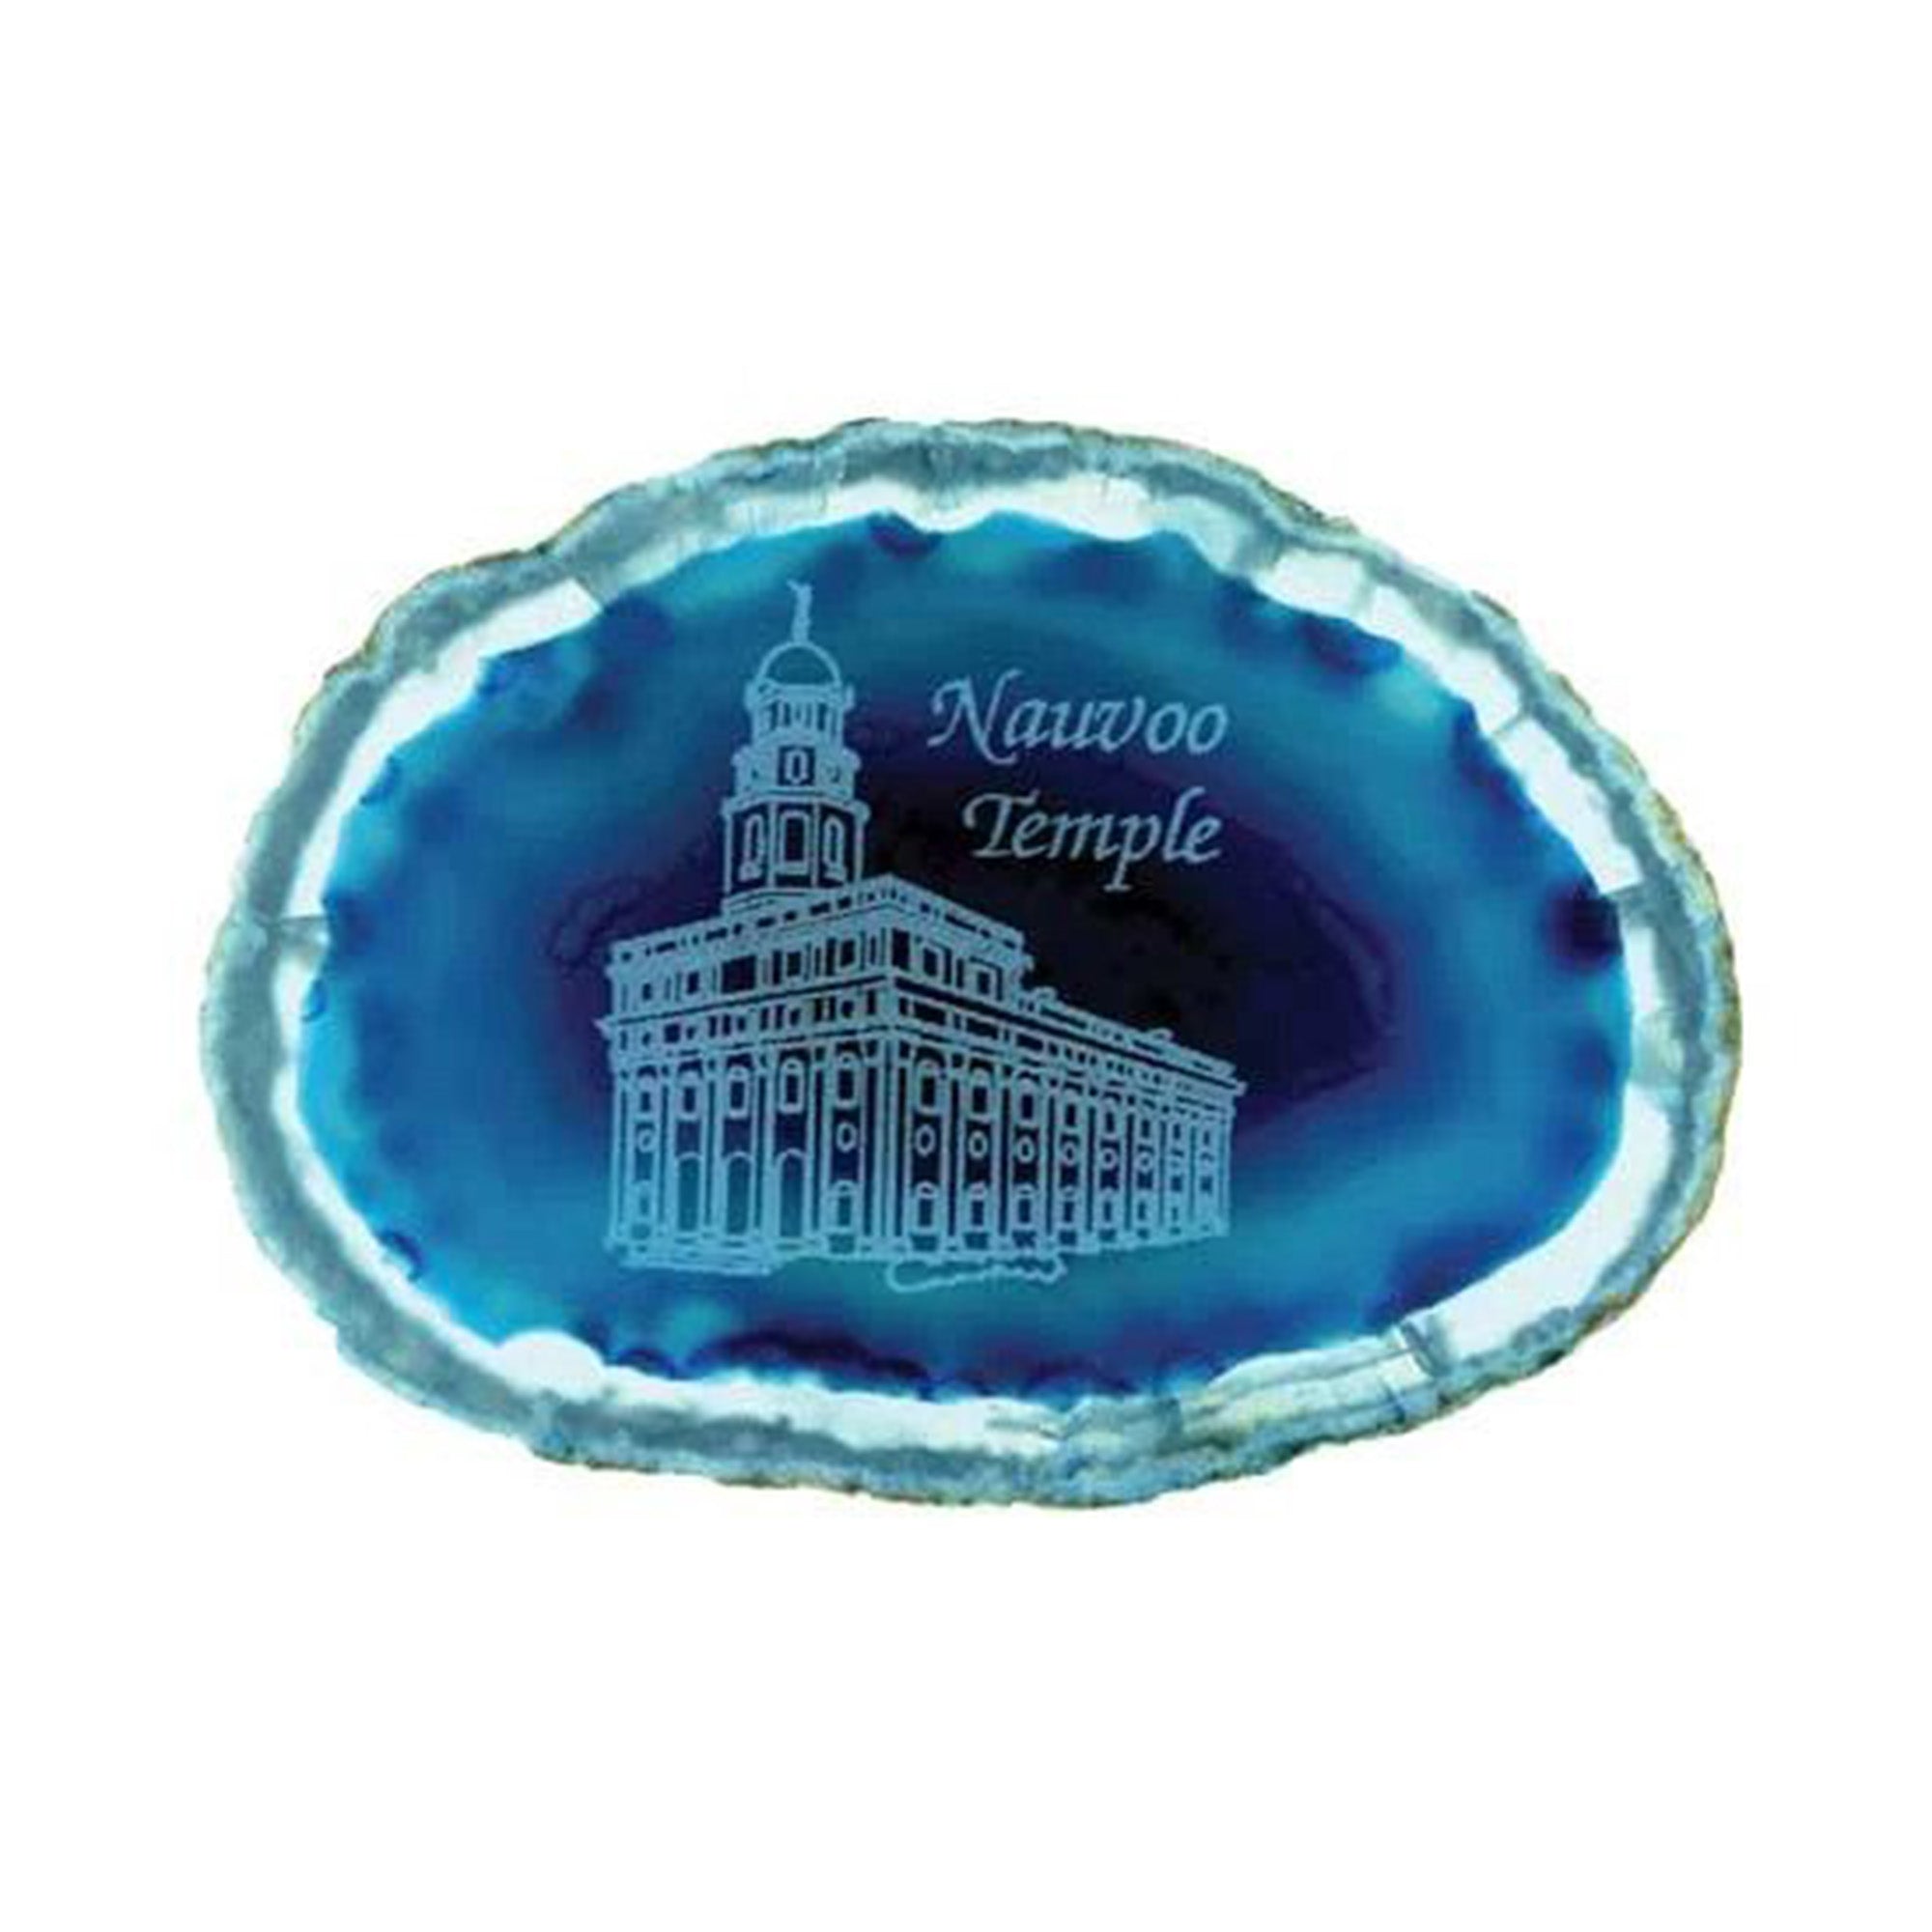 C32 Nauvoo Temple Geode Magnet CTR Ring One Moment in Time